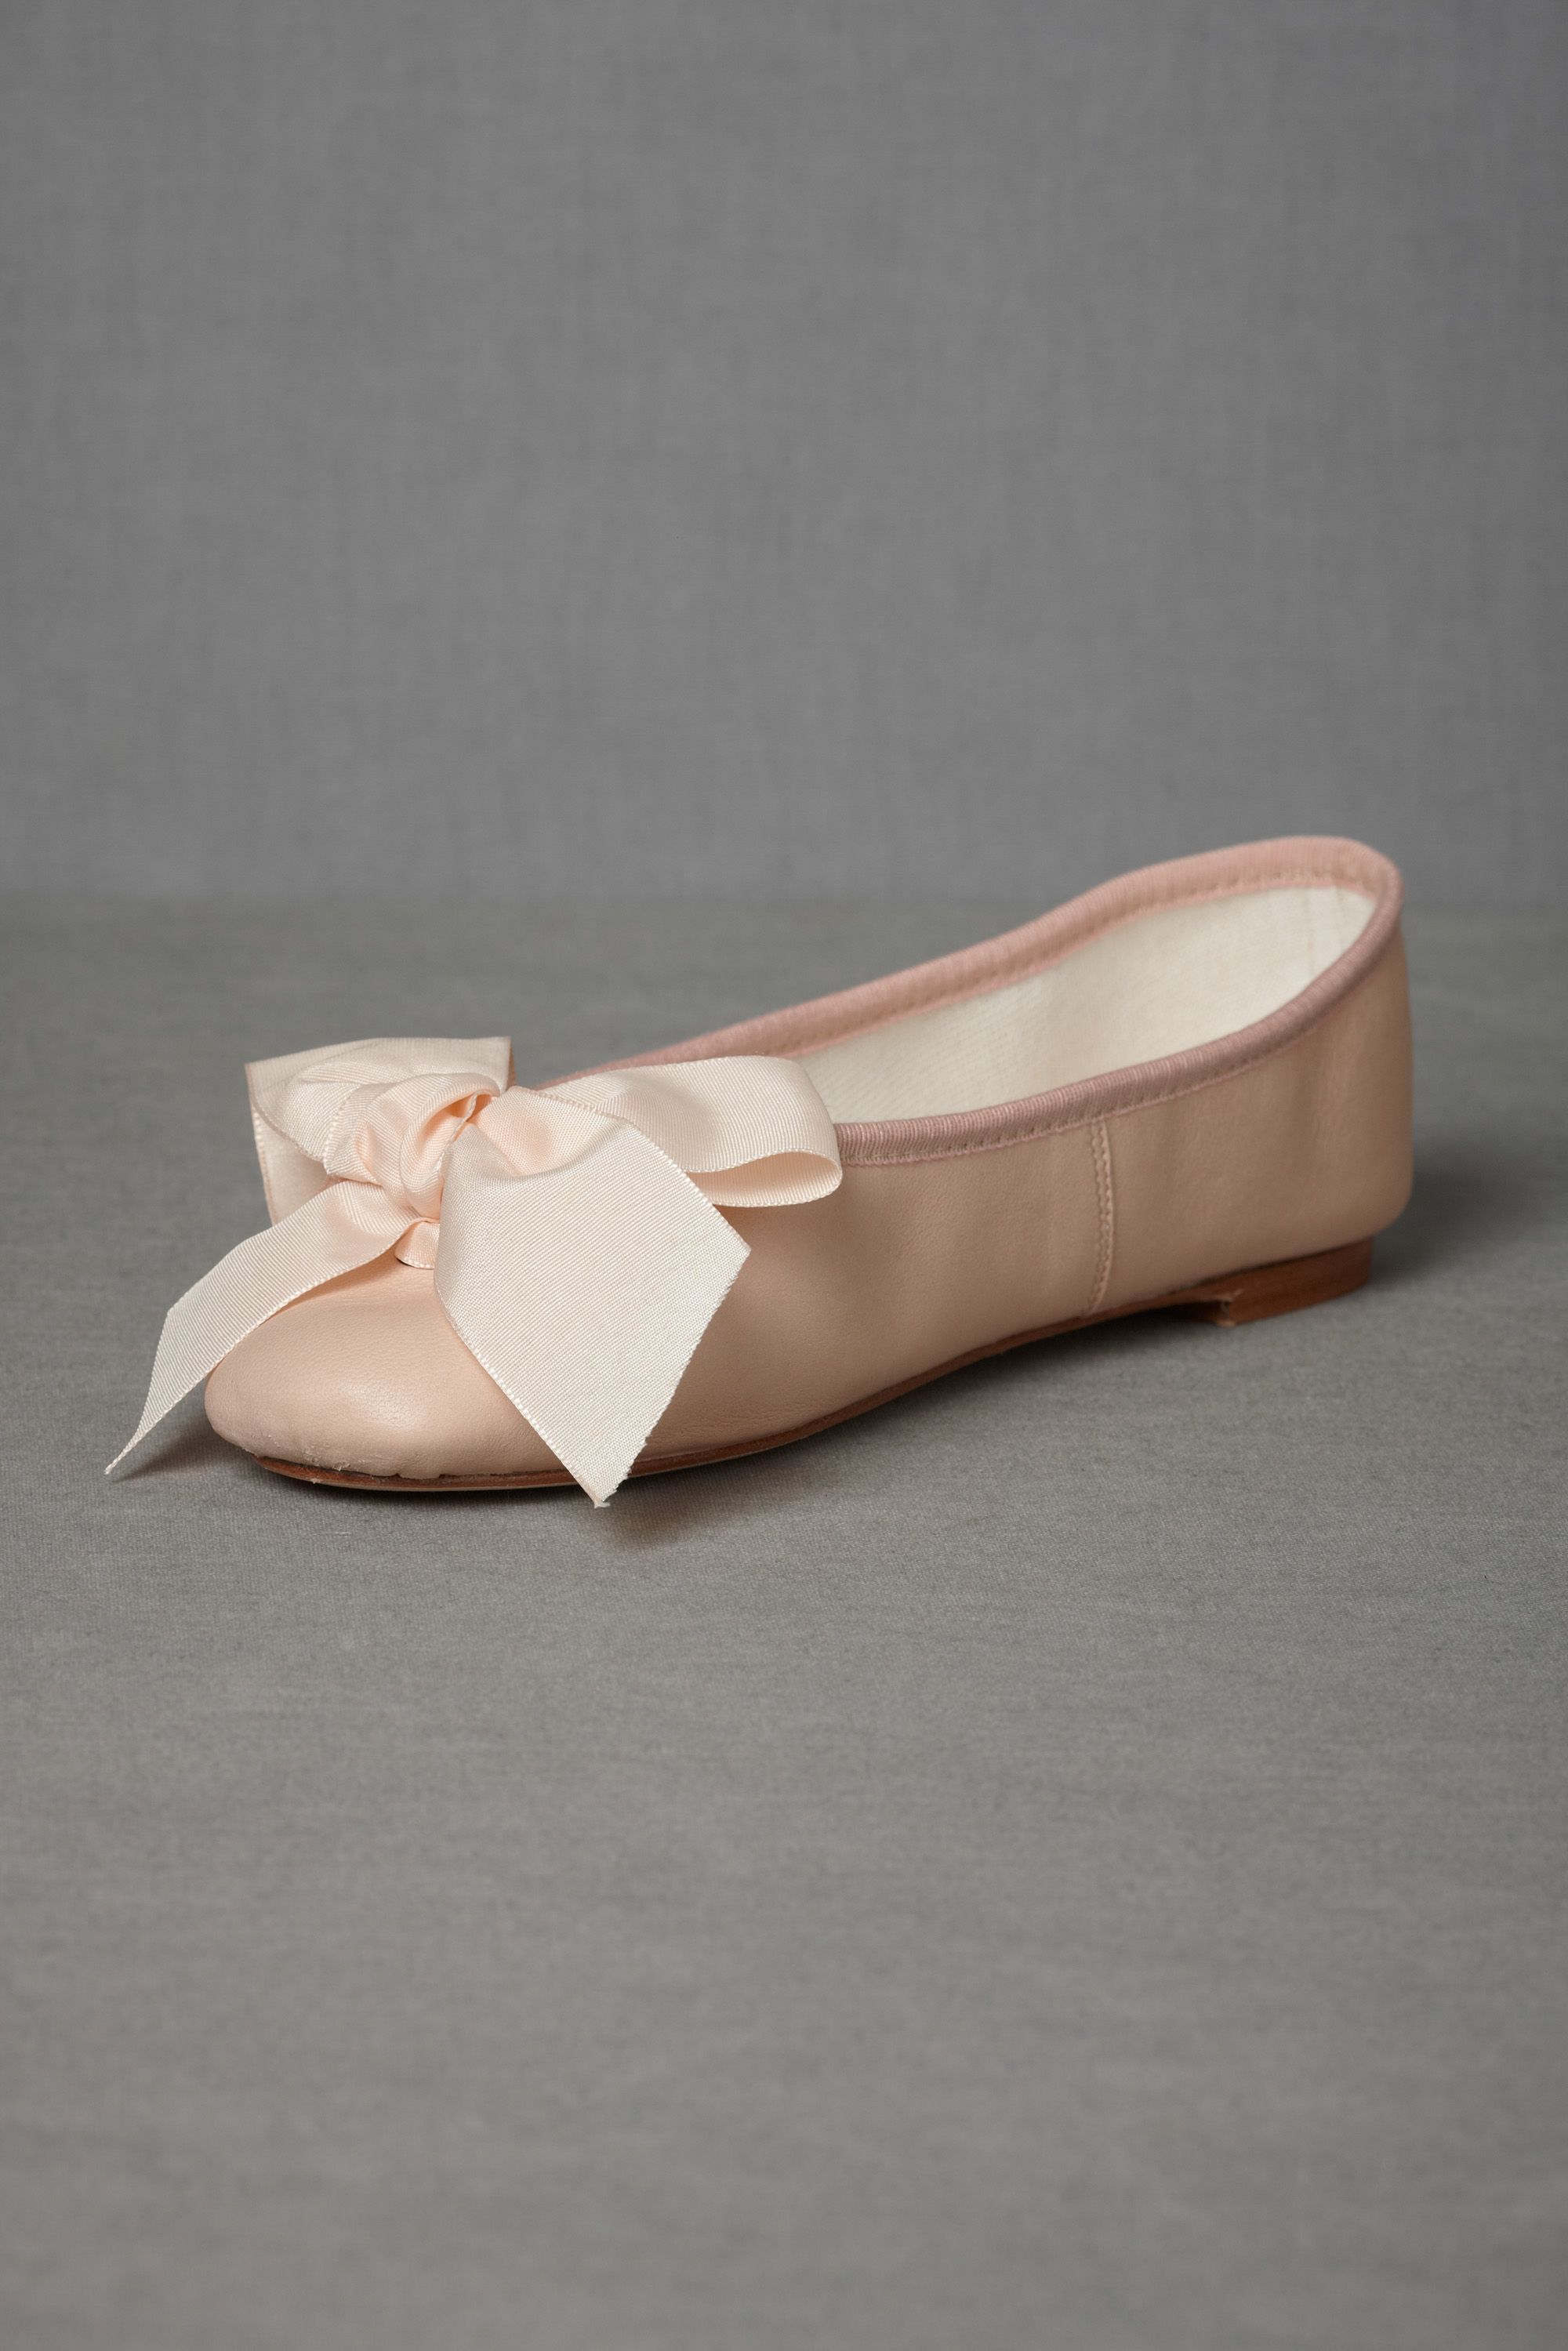 Parisian Ballet Flats in Shoes & Accessories | BHLDN